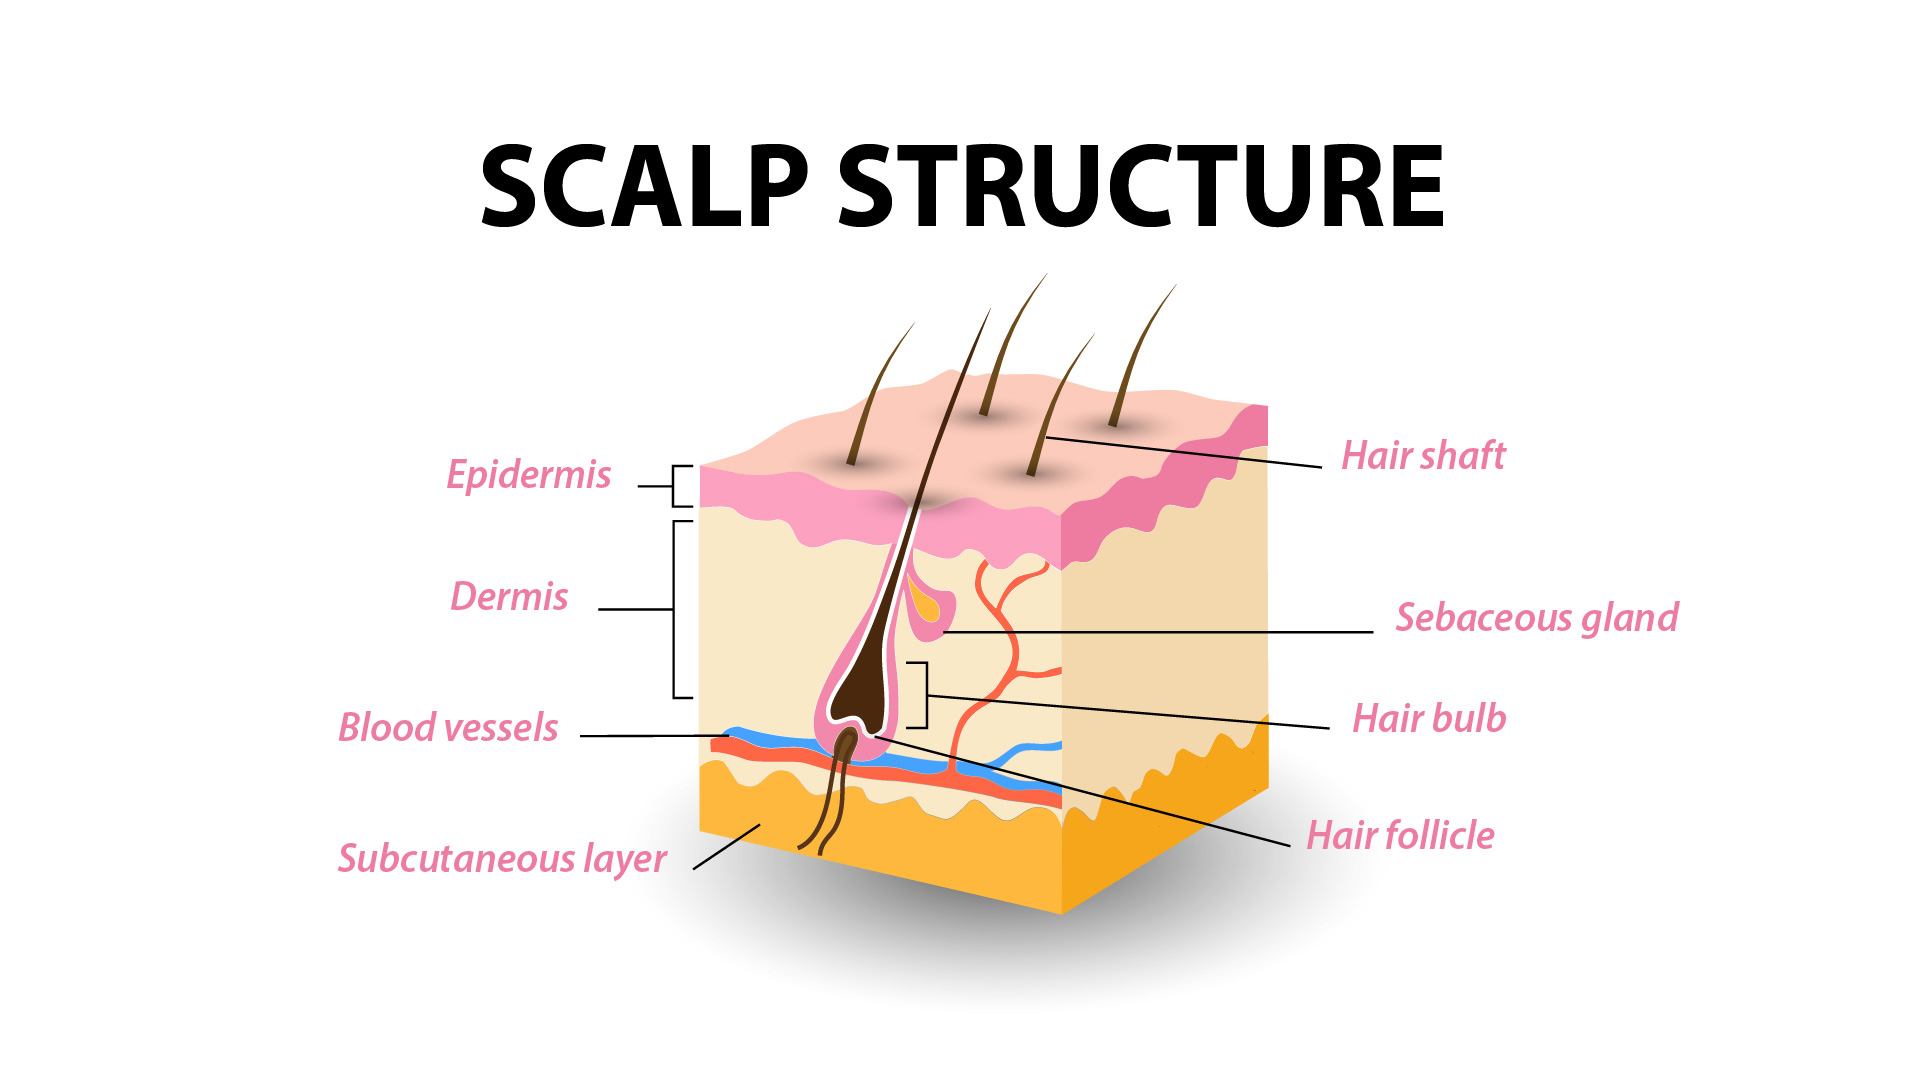 The scalp structure